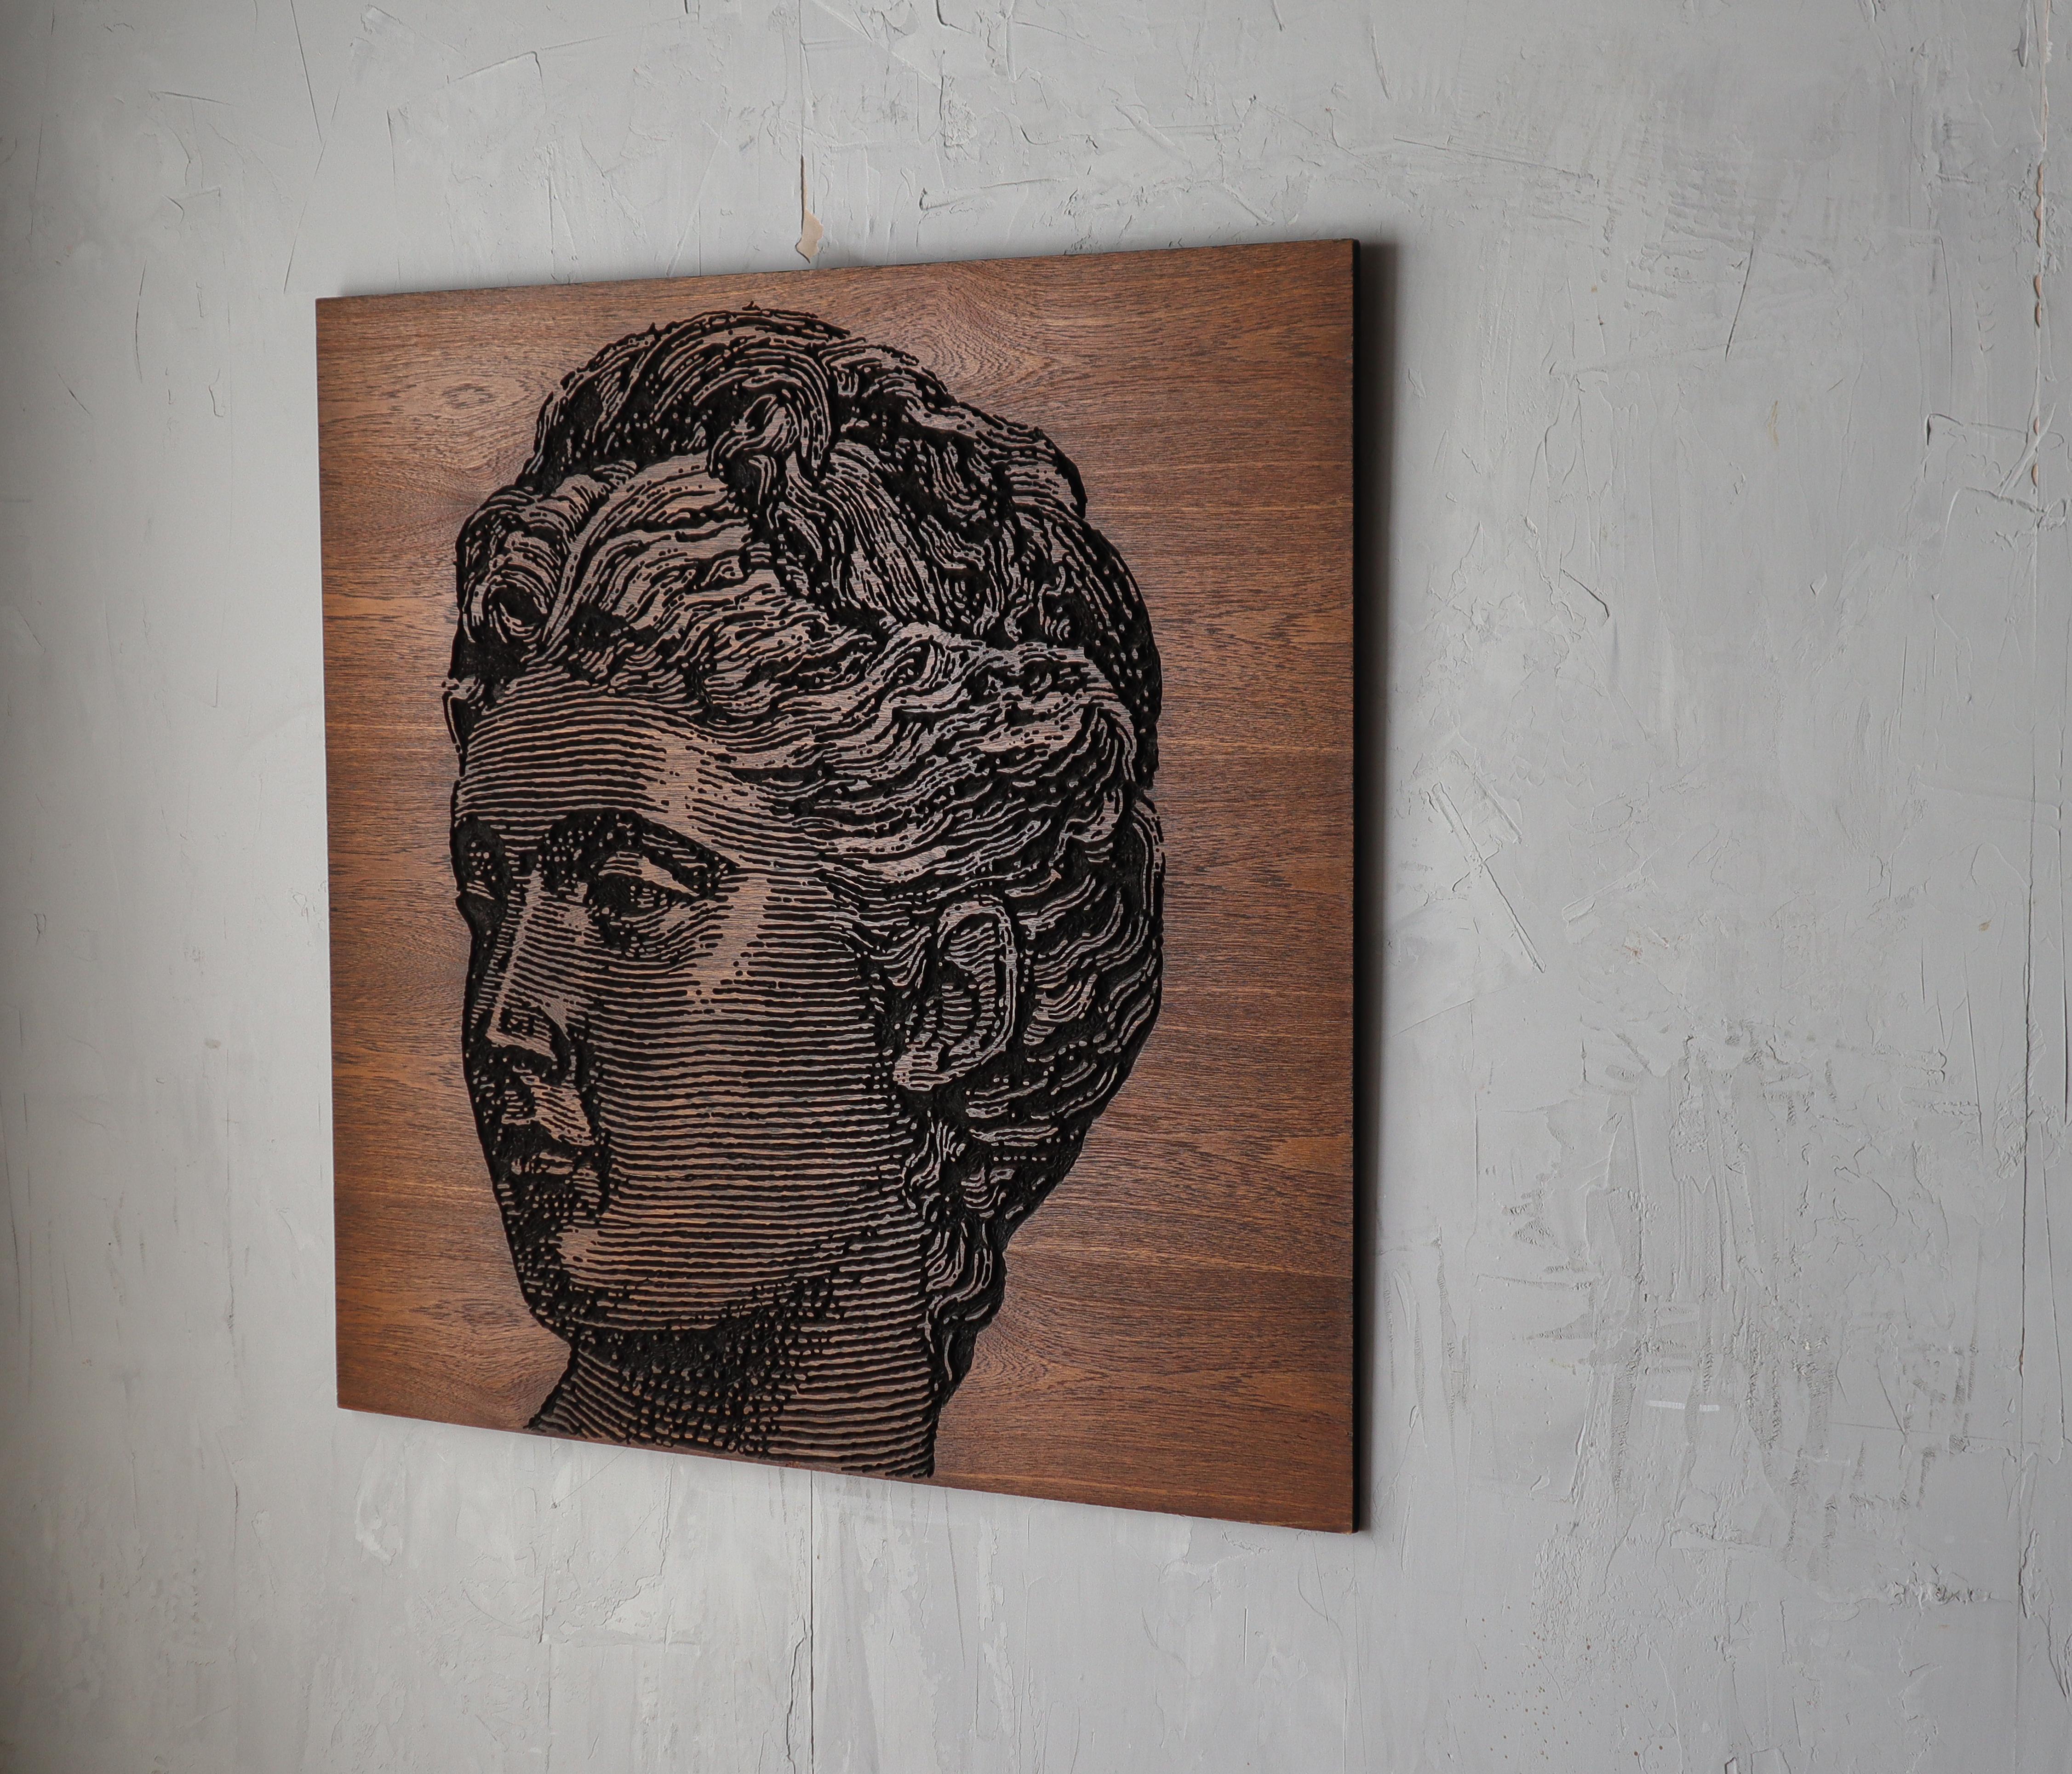 This LARGE 4 foot, hand drawn and carved, walnut panel is incredible.  The piece depicts a feminine face, possibly of Greek origin.  If you are looking for a conversation piece, or love art that is truly unique, look no further.  

Sometimes